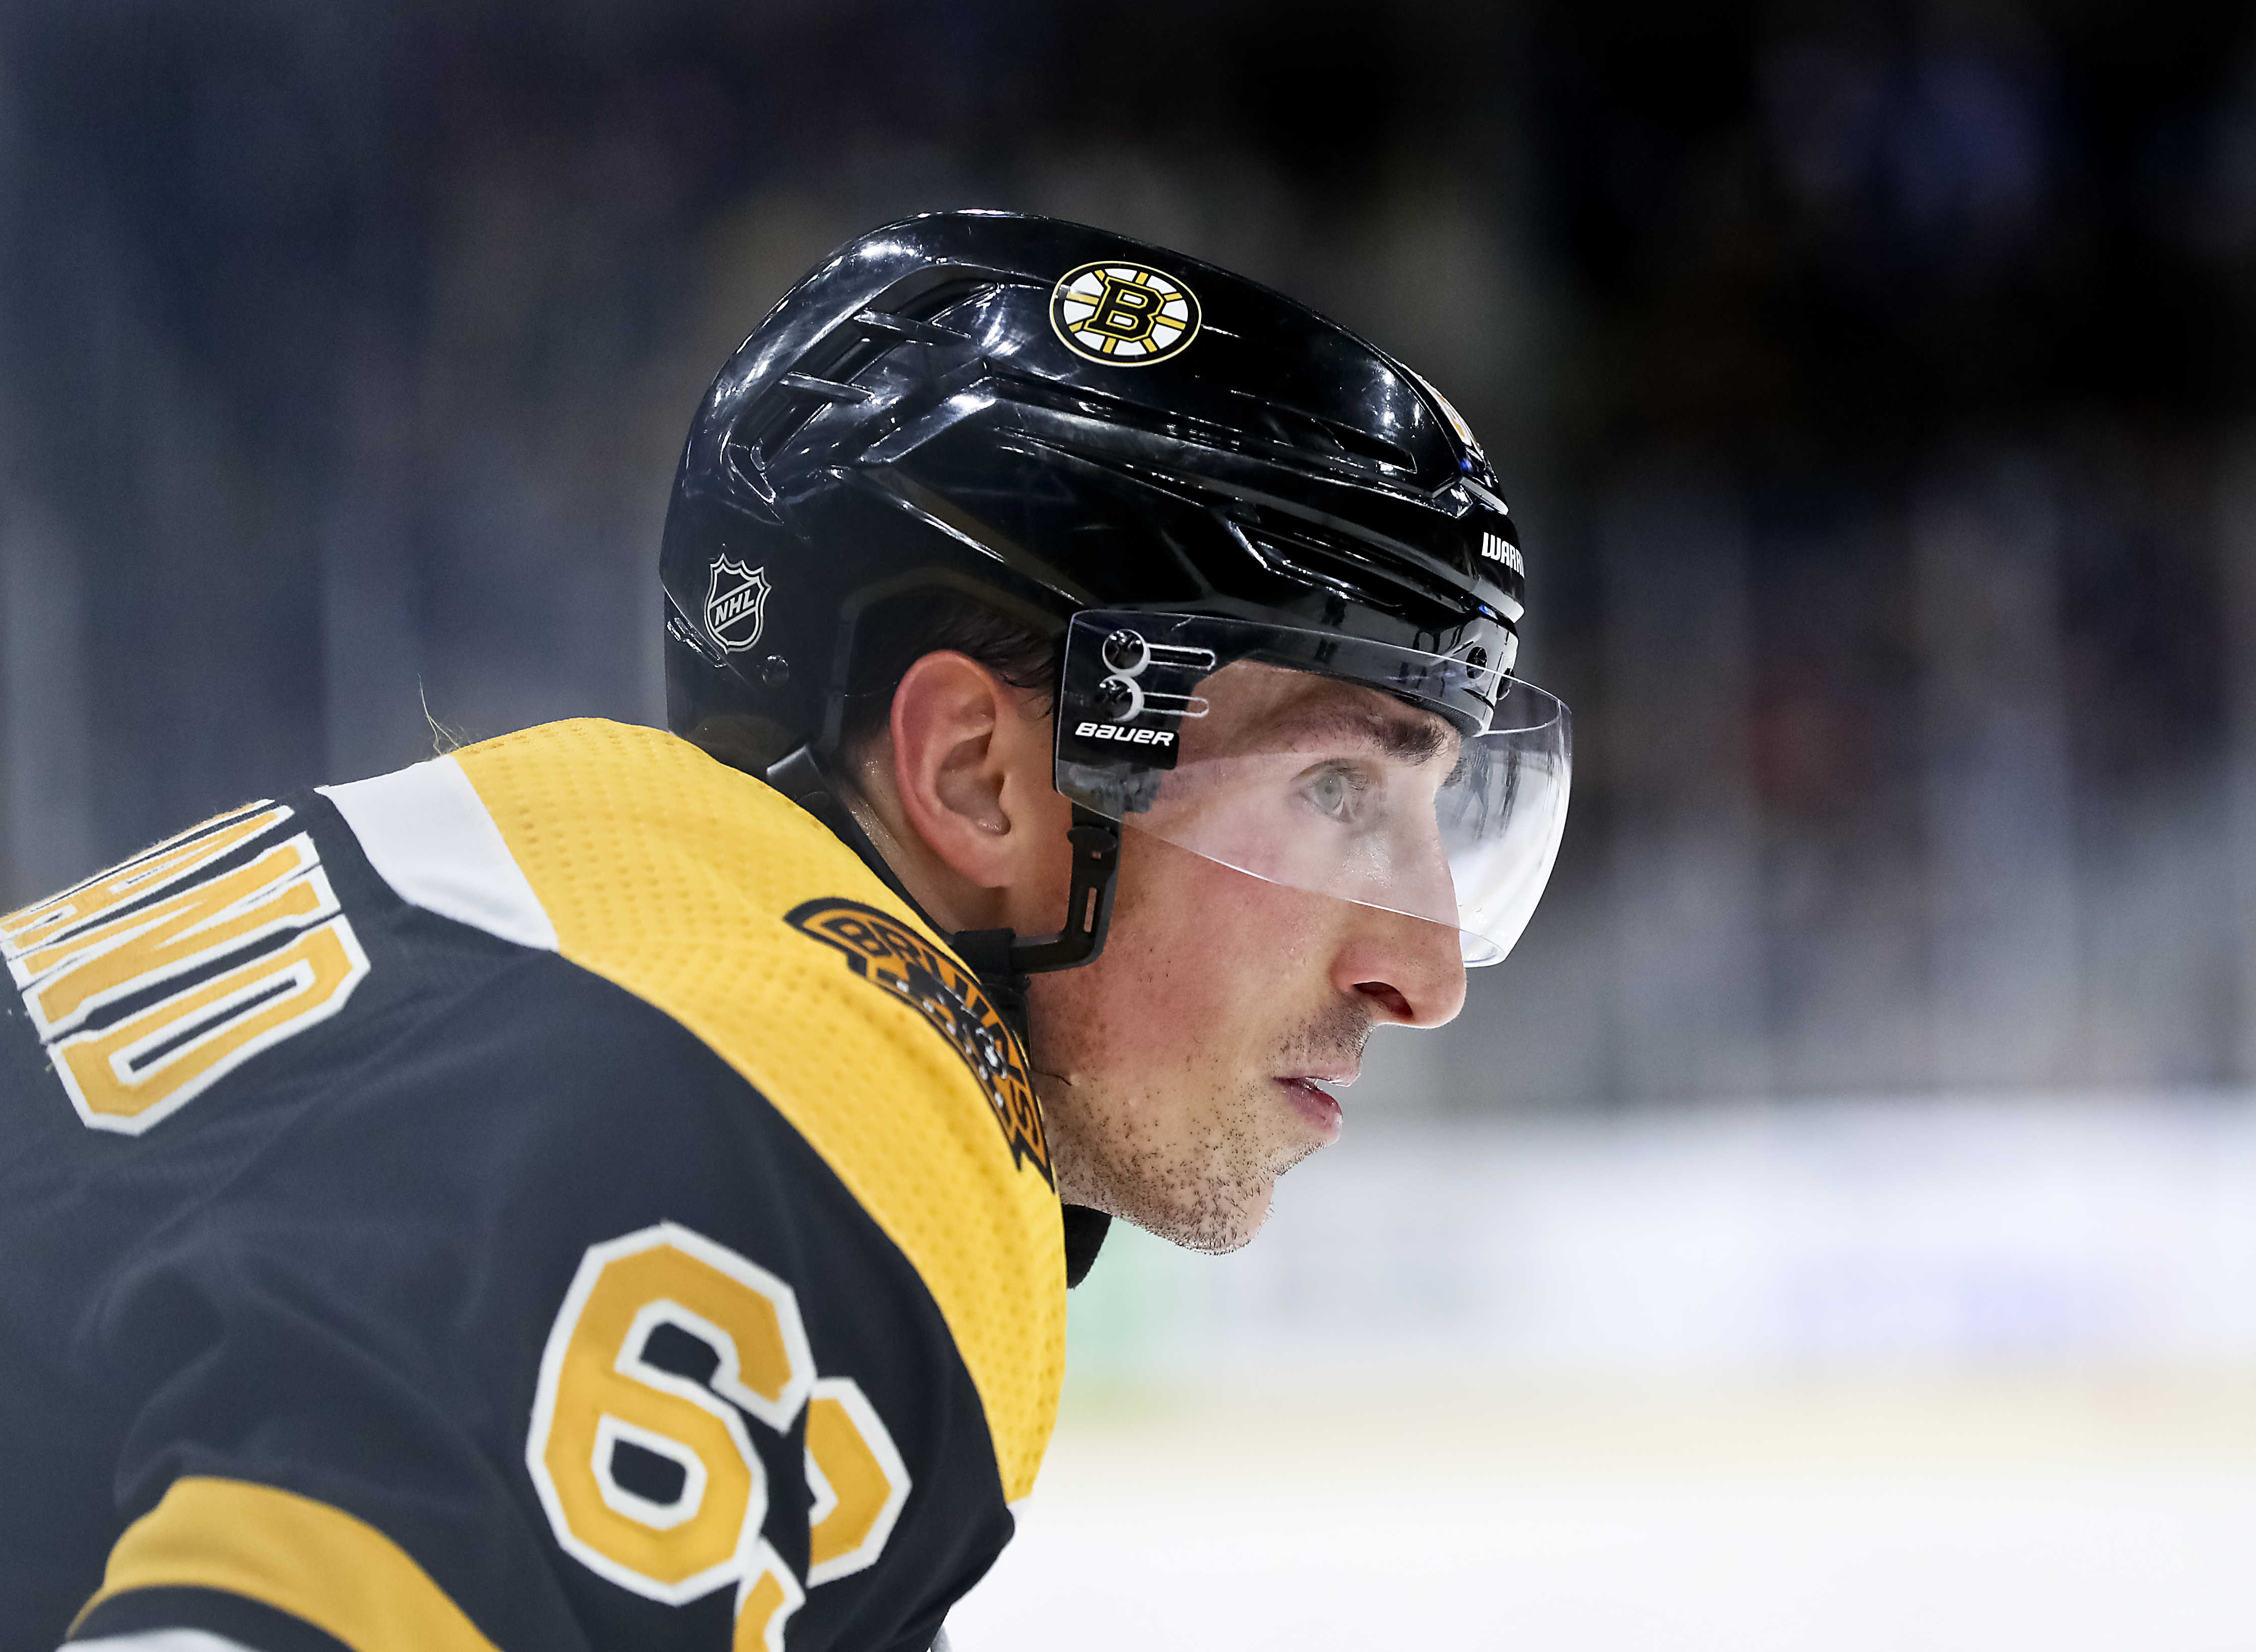 Once an unlikely star, Brad Marchand's now learning to lead